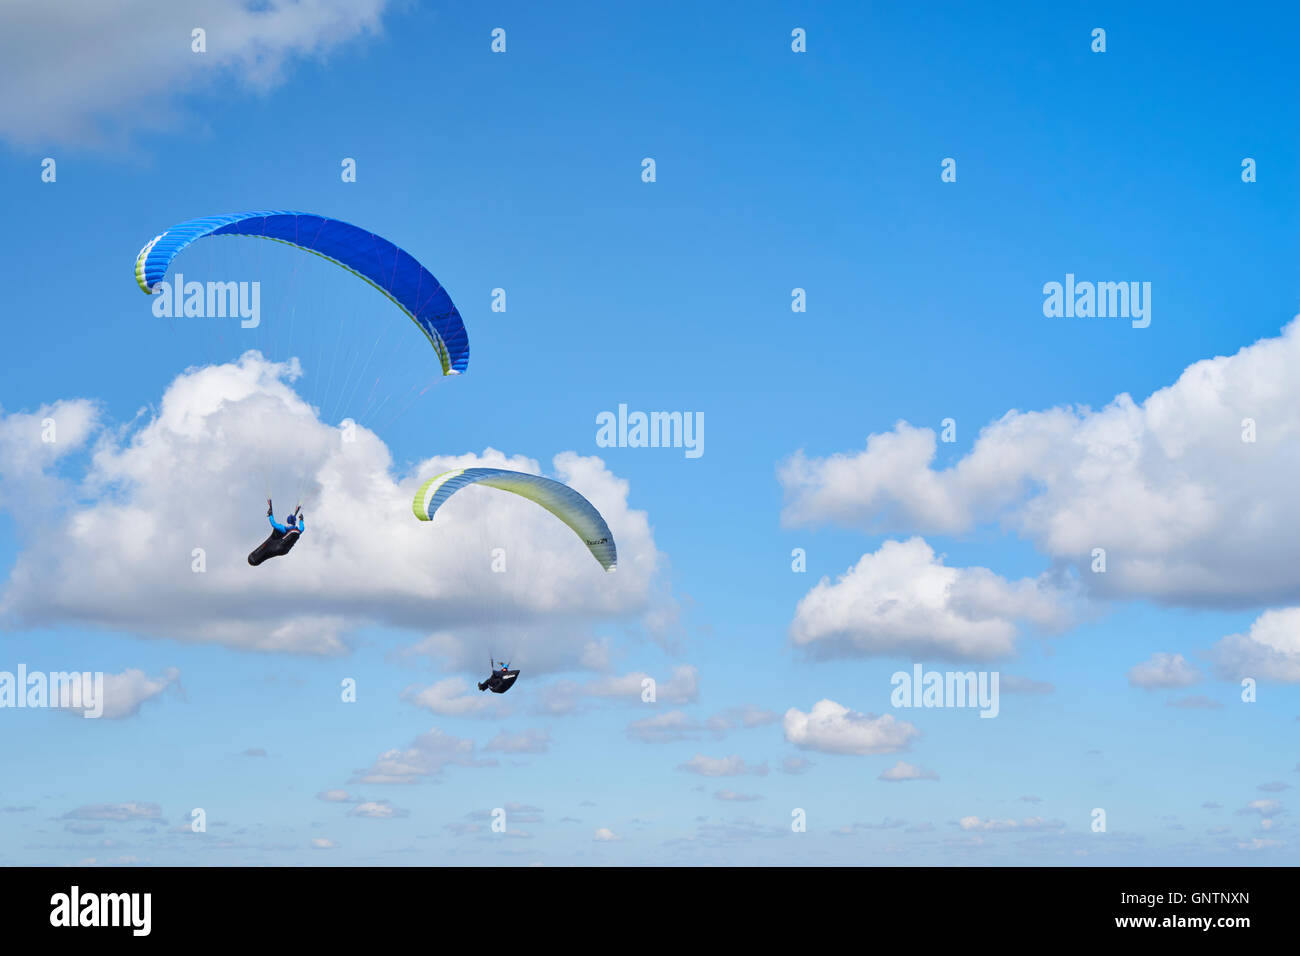 Paragliding on the Berkshire downs, England. Stock Photo